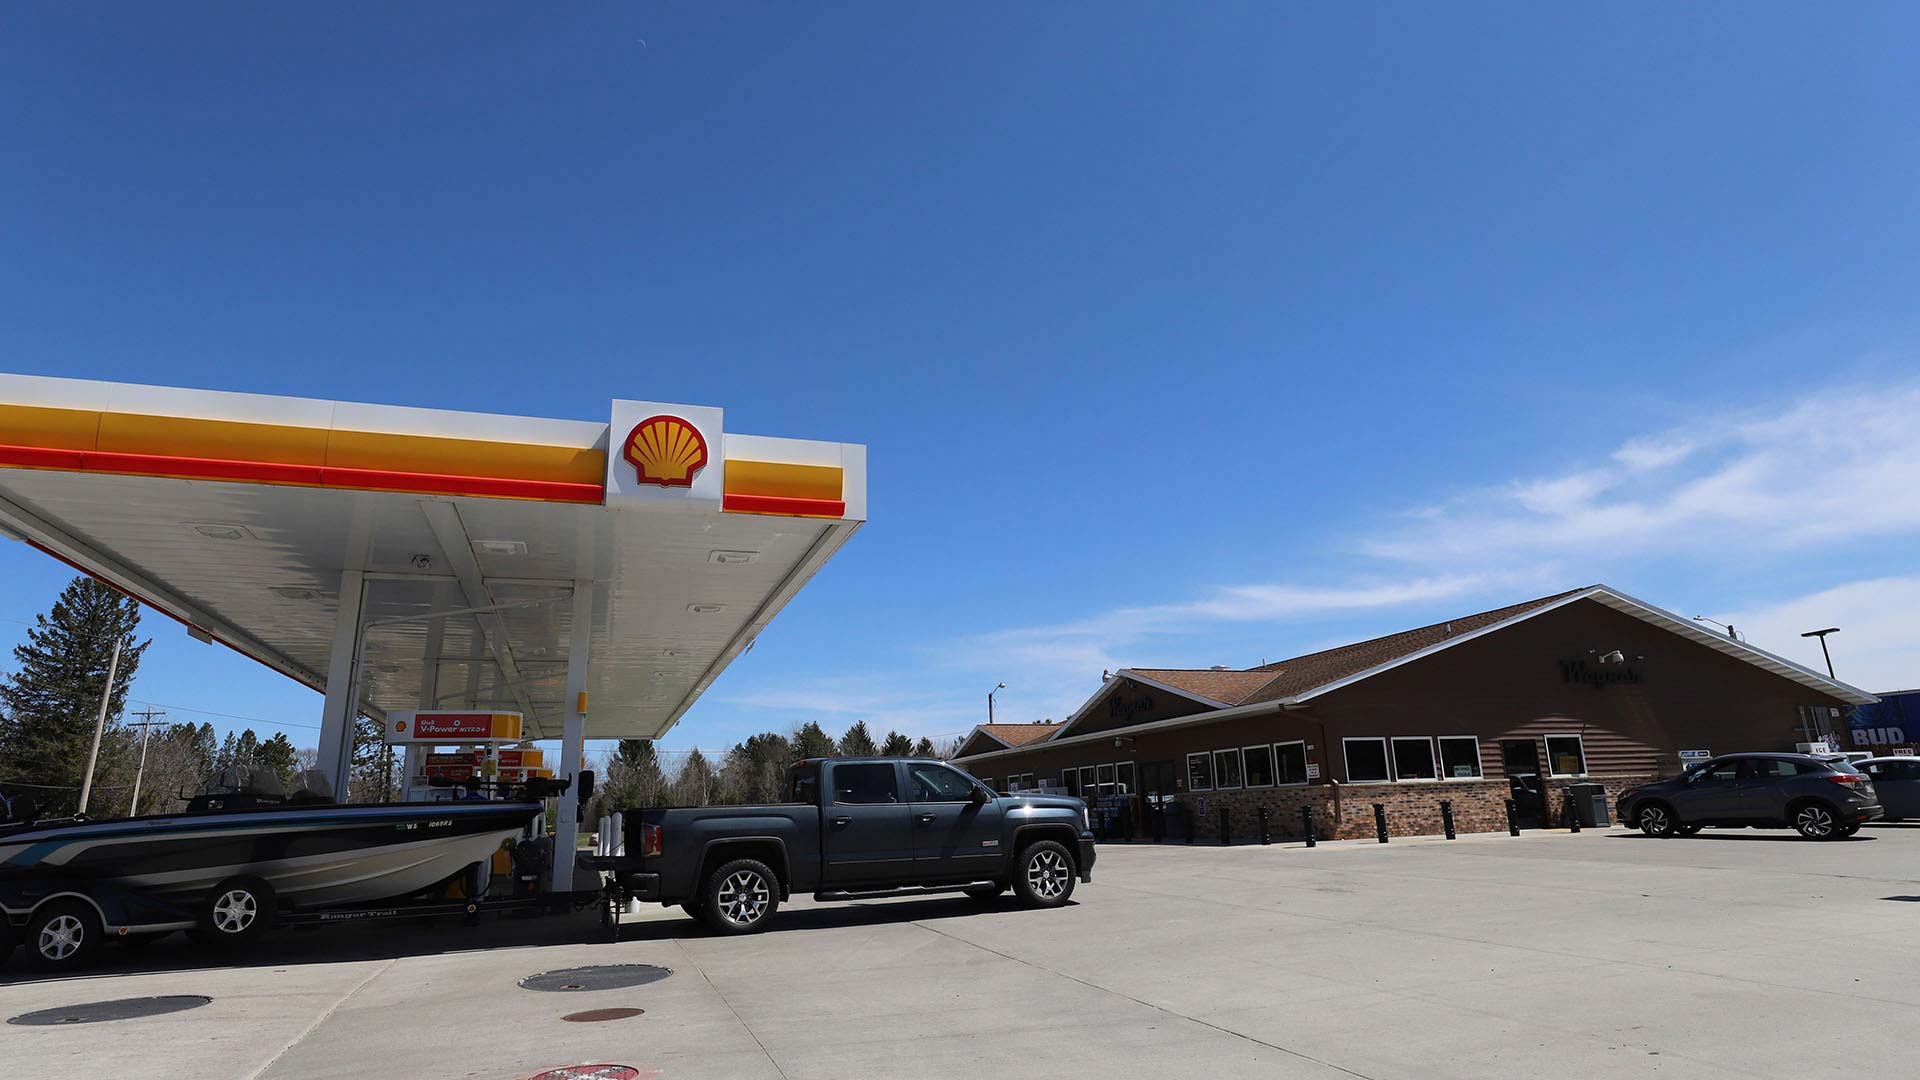 Shell gas station pumps and building